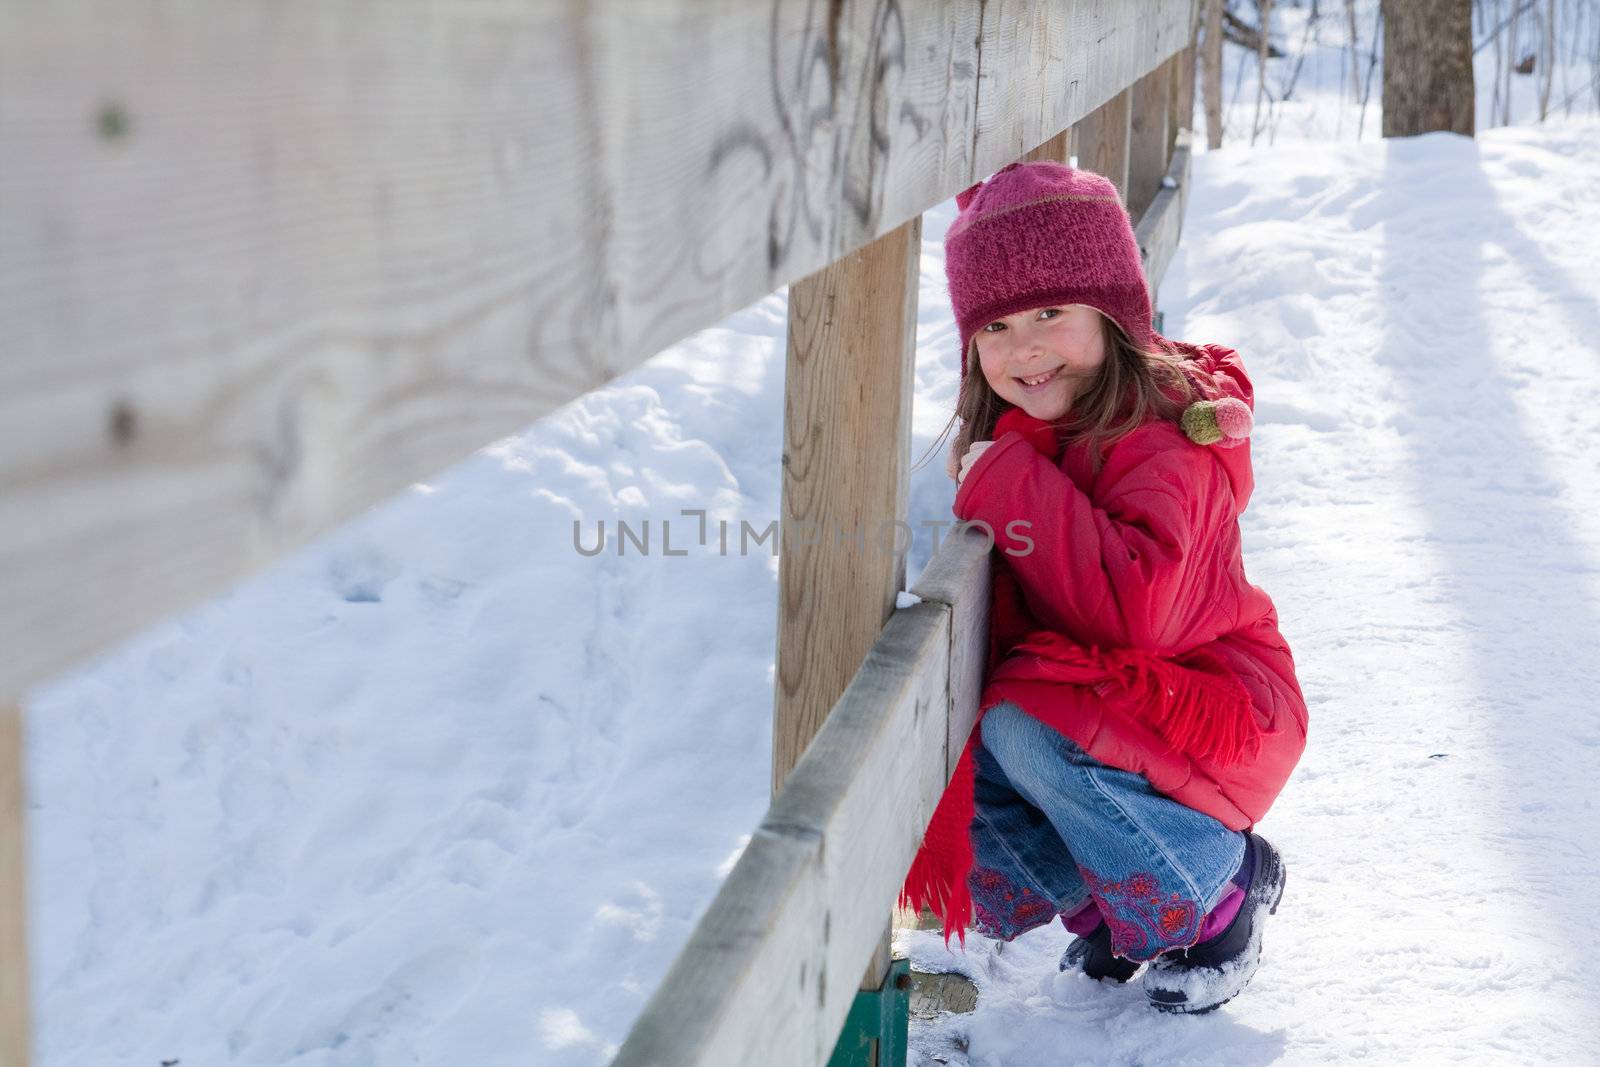 Cute little girl crouching by a fence on a wooden bridge